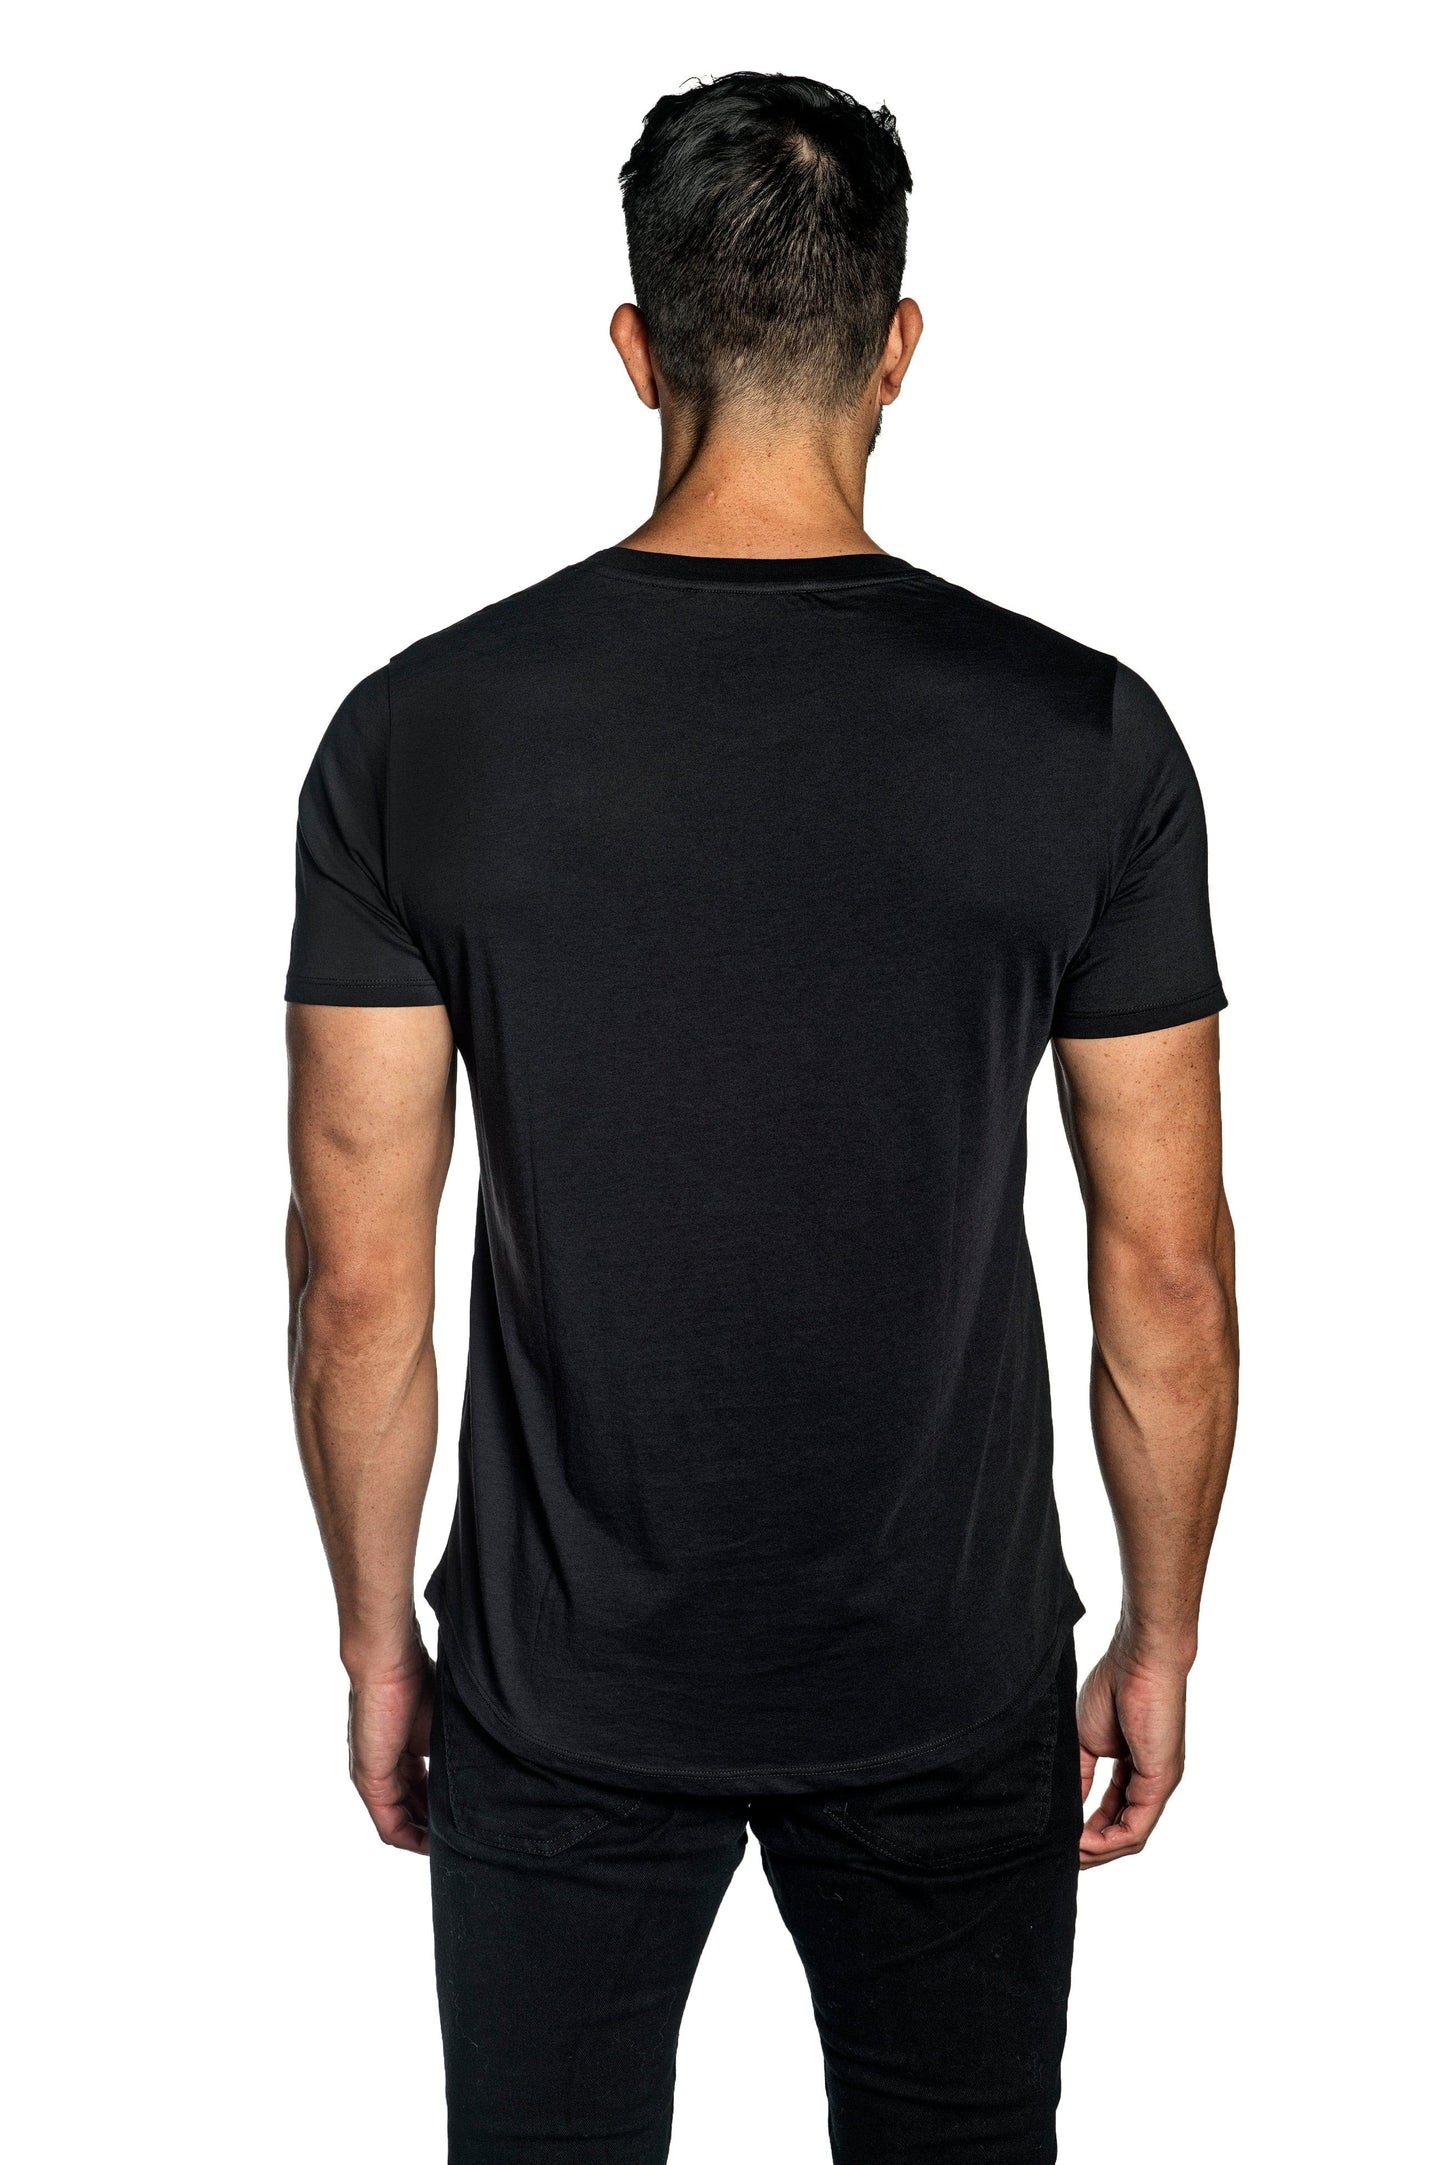 Black Mens T-Shirt With Lightning Embroidery TEE-39.